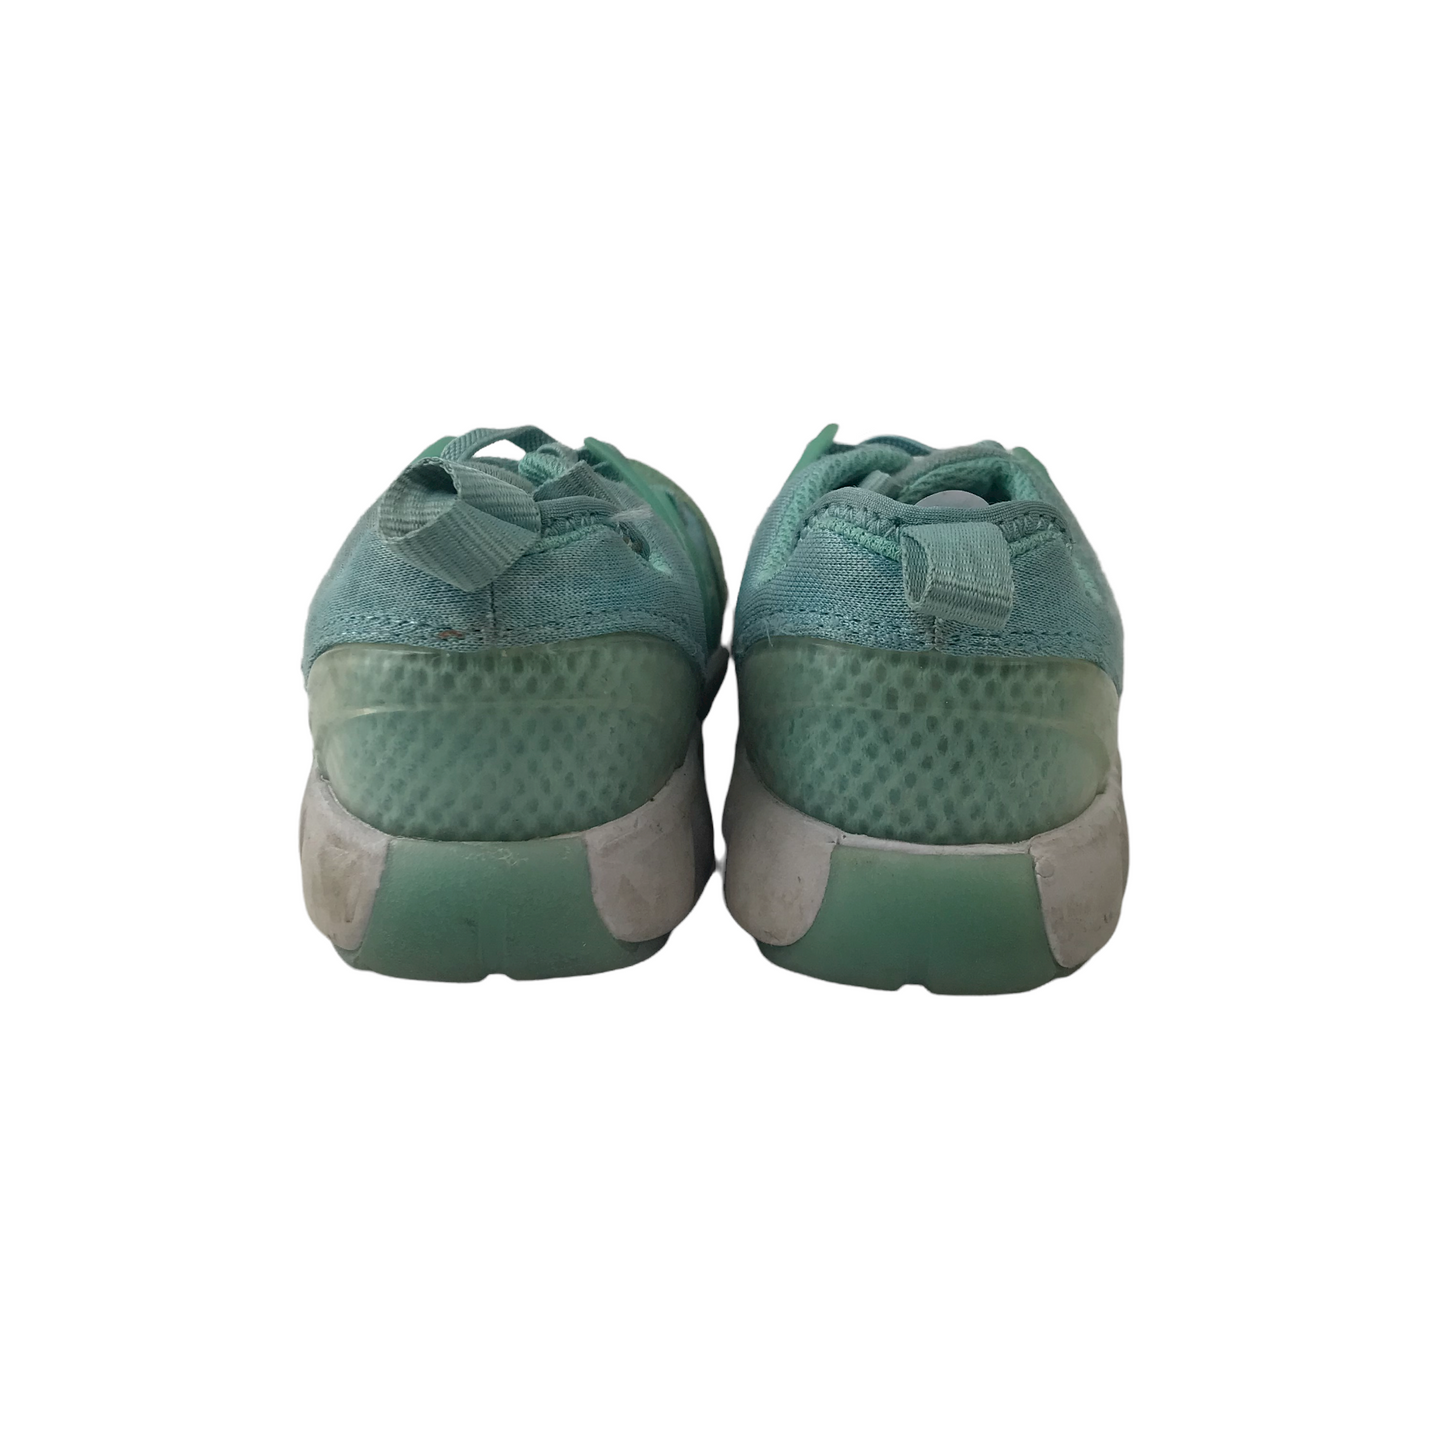 Clarks Turquoise Trainers Shoe Size 12G (jr)